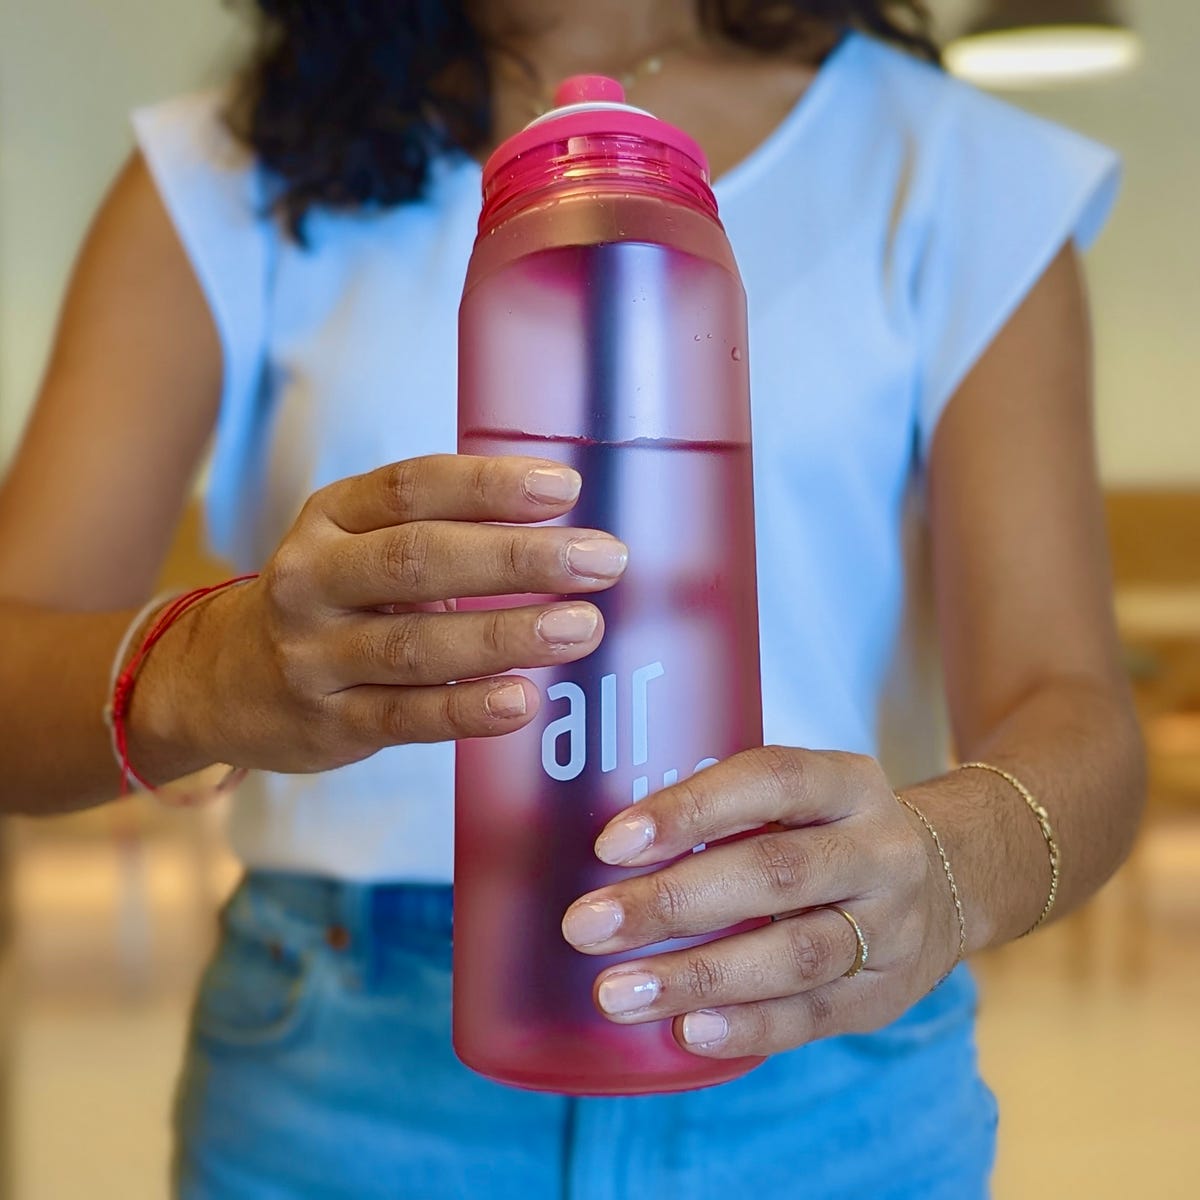 This $39 water bottle can hack your taste buds: Is it worth it?